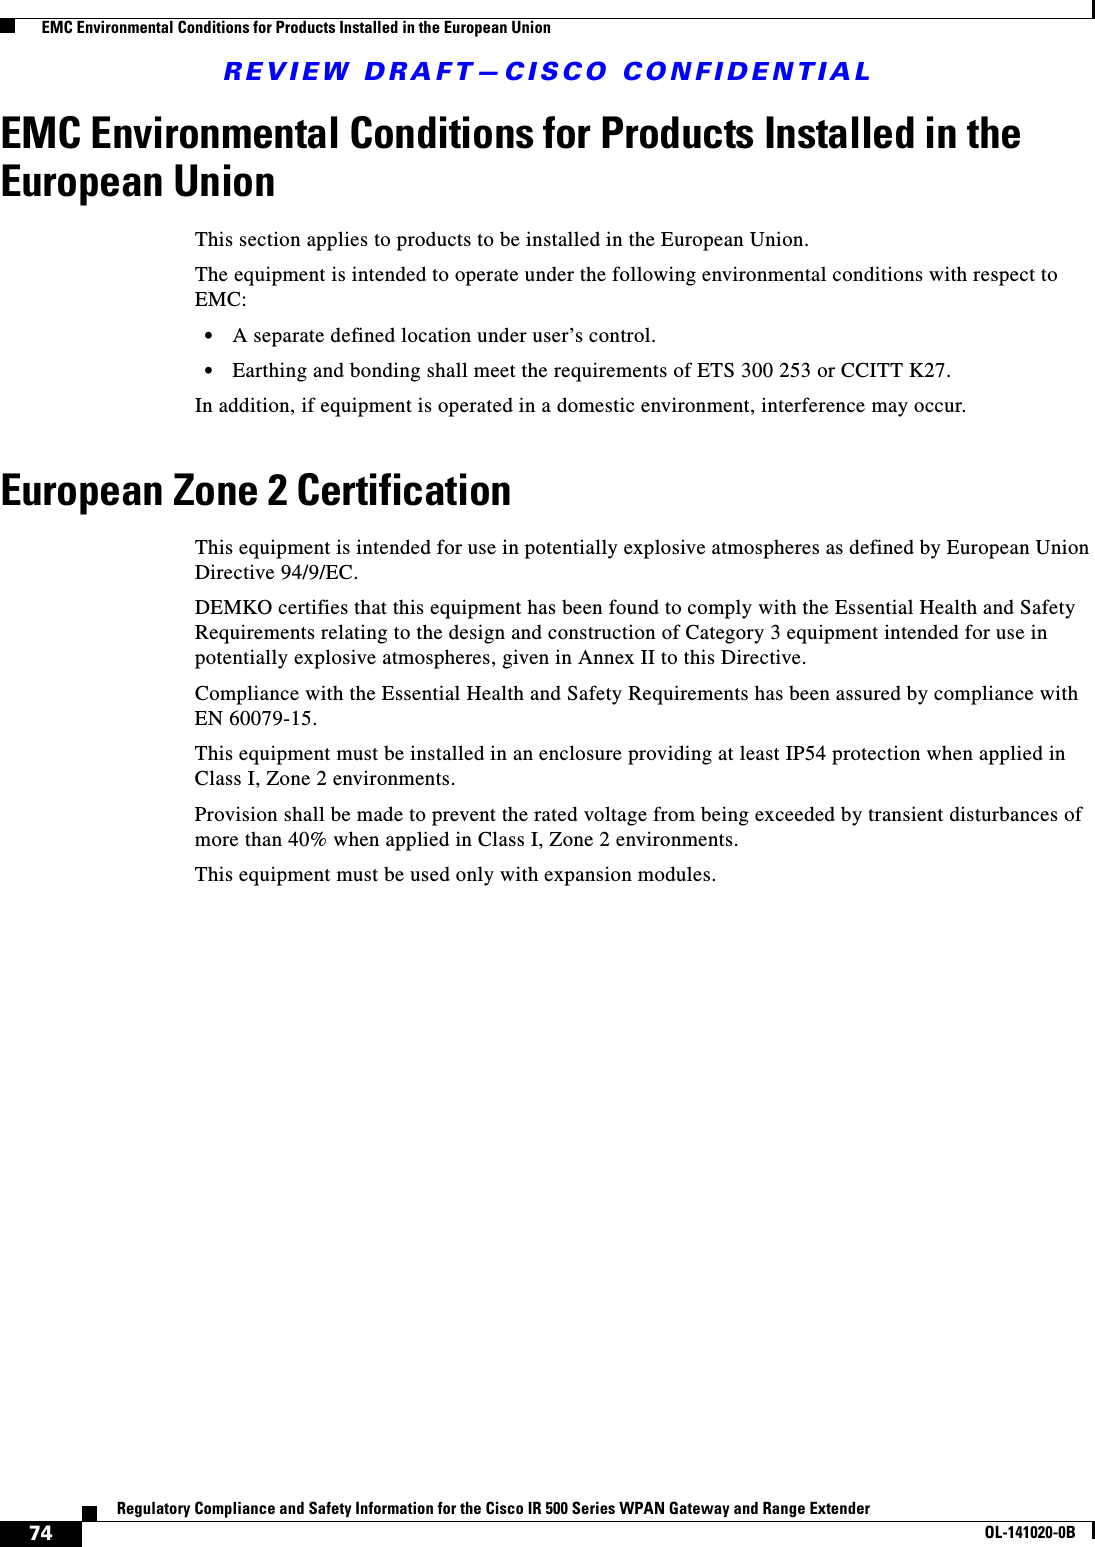 REVIEW DRAFT—CISCO CONFIDENTIAL74Regulatory Compliance and Safety Information for the Cisco IR 500 Series WPAN Gateway and Range ExtenderOL-141020-0B  EMC Environmental Conditions for Products Installed in the European UnionEMC Environmental Conditions for Products Installed in the European UnionThis section applies to products to be installed in the European Union. The equipment is intended to operate under the following environmental conditions with respect to EMC:•A separate defined location under user’s control. •Earthing and bonding shall meet the requirements of ETS 300 253 or CCITT K27.In addition, if equipment is operated in a domestic environment, interference may occur.European Zone 2 CertificationThis equipment is intended for use in potentially explosive atmospheres as defined by European Union Directive 94/9/EC.DEMKO certifies that this equipment has been found to comply with the Essential Health and Safety Requirements relating to the design and construction of Category 3 equipment intended for use in potentially explosive atmospheres, given in Annex II to this Directive.Compliance with the Essential Health and Safety Requirements has been assured by compliance with EN 60079-15.This equipment must be installed in an enclosure providing at least IP54 protection when applied in Class I, Zone 2 environments.Provision shall be made to prevent the rated voltage from being exceeded by transient disturbances of more than 40% when applied in Class I, Zone 2 environments. This equipment must be used only with expansion modules.